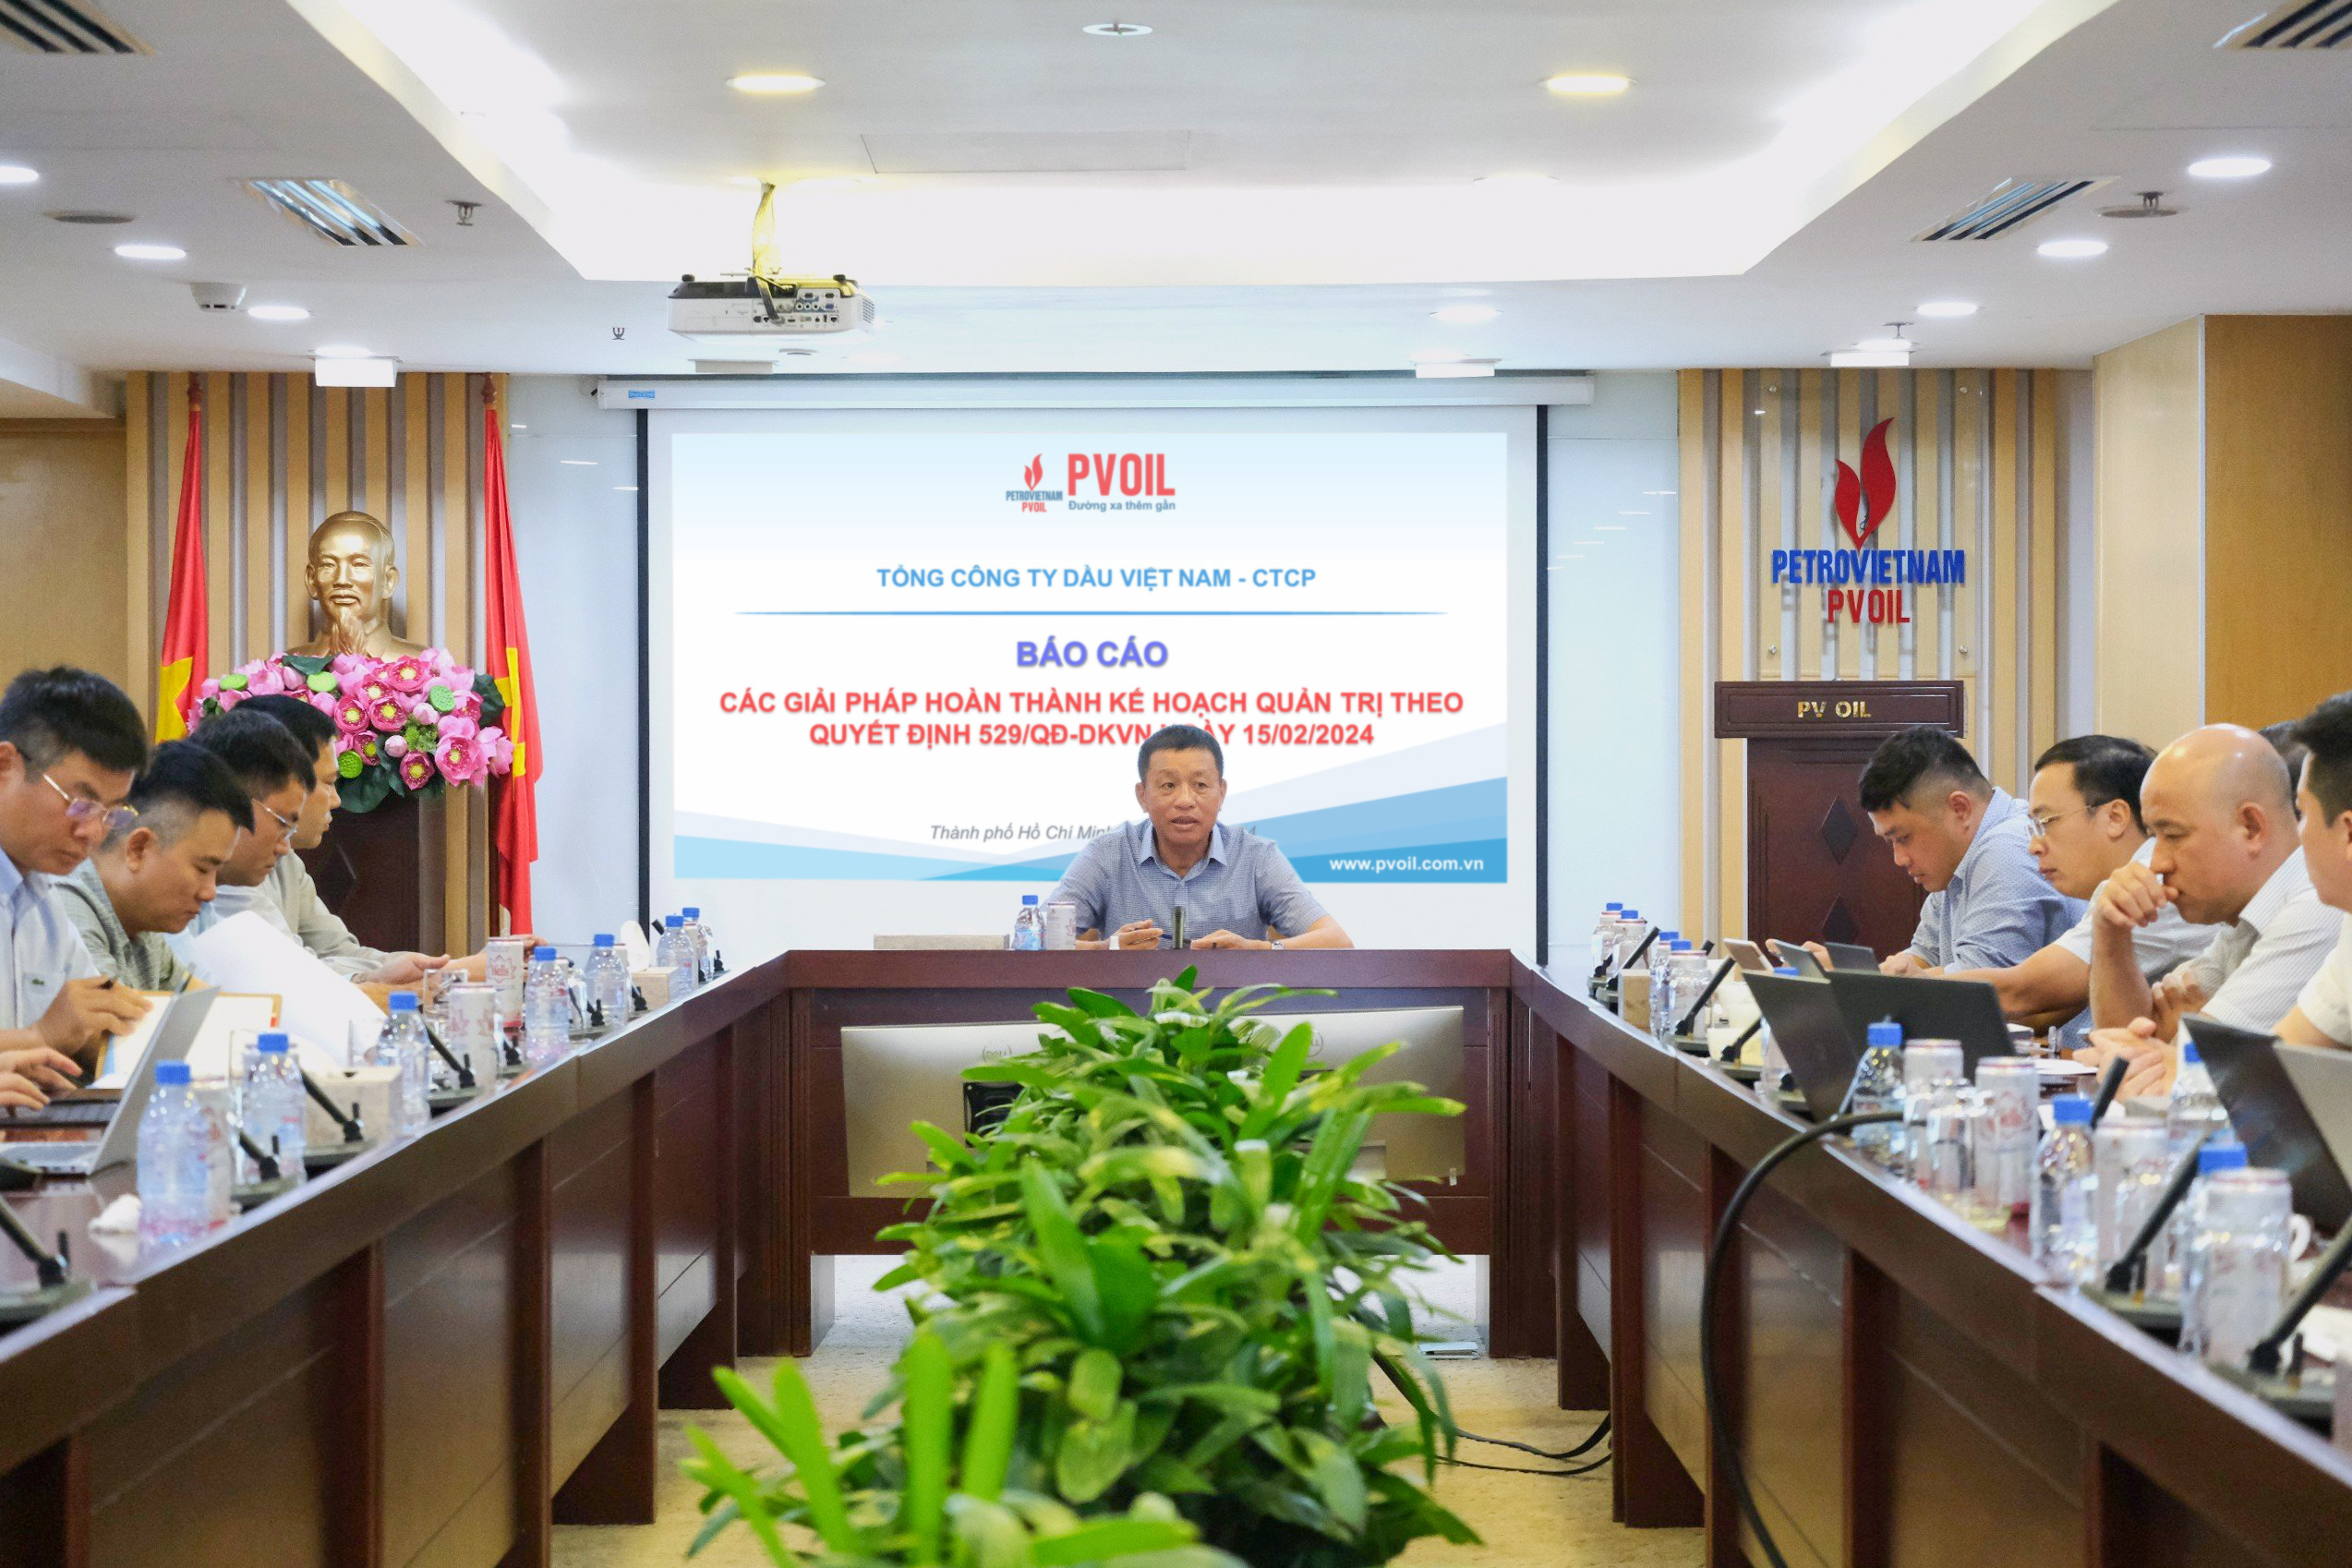 PVOIL determined to fulfill the 2024 management plan of Vietnam Oil and Gas Group